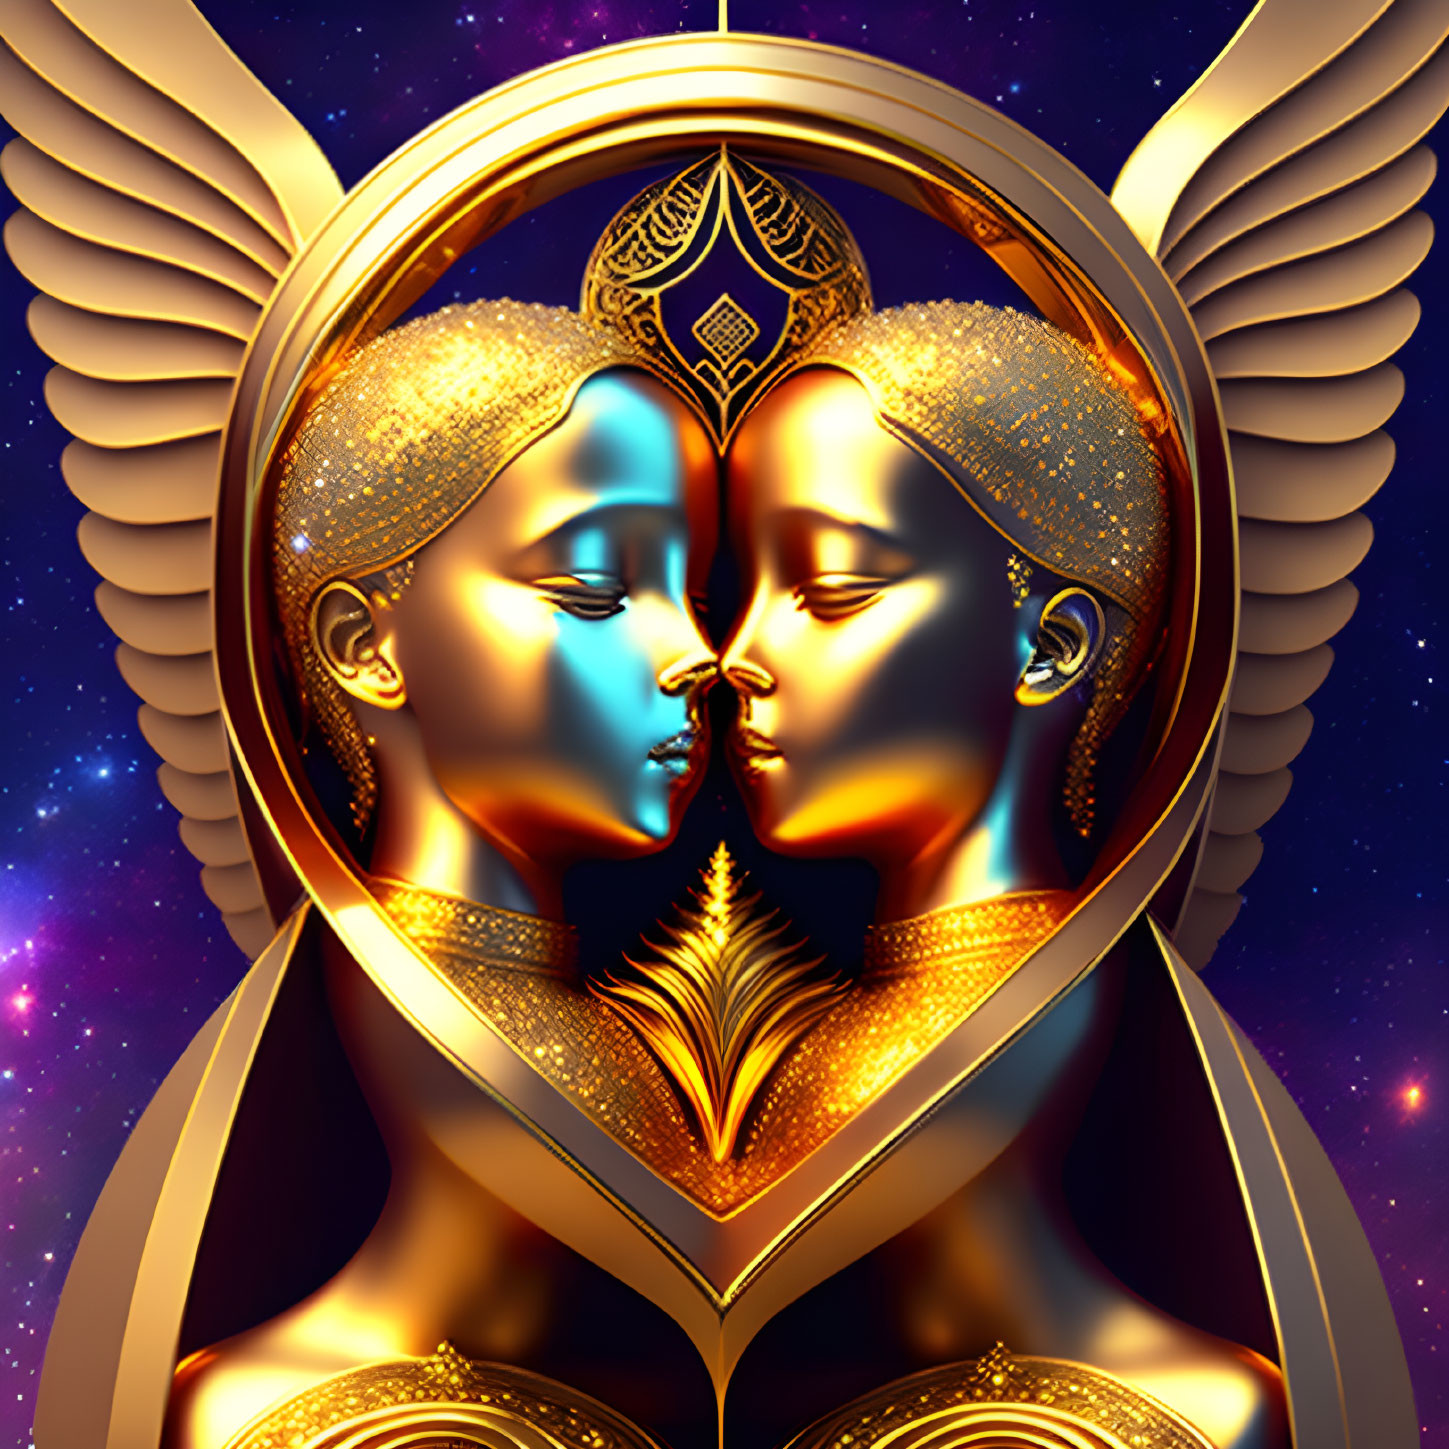 Golden profile faces in heart shape on cosmic backdrop with ornate details and wings